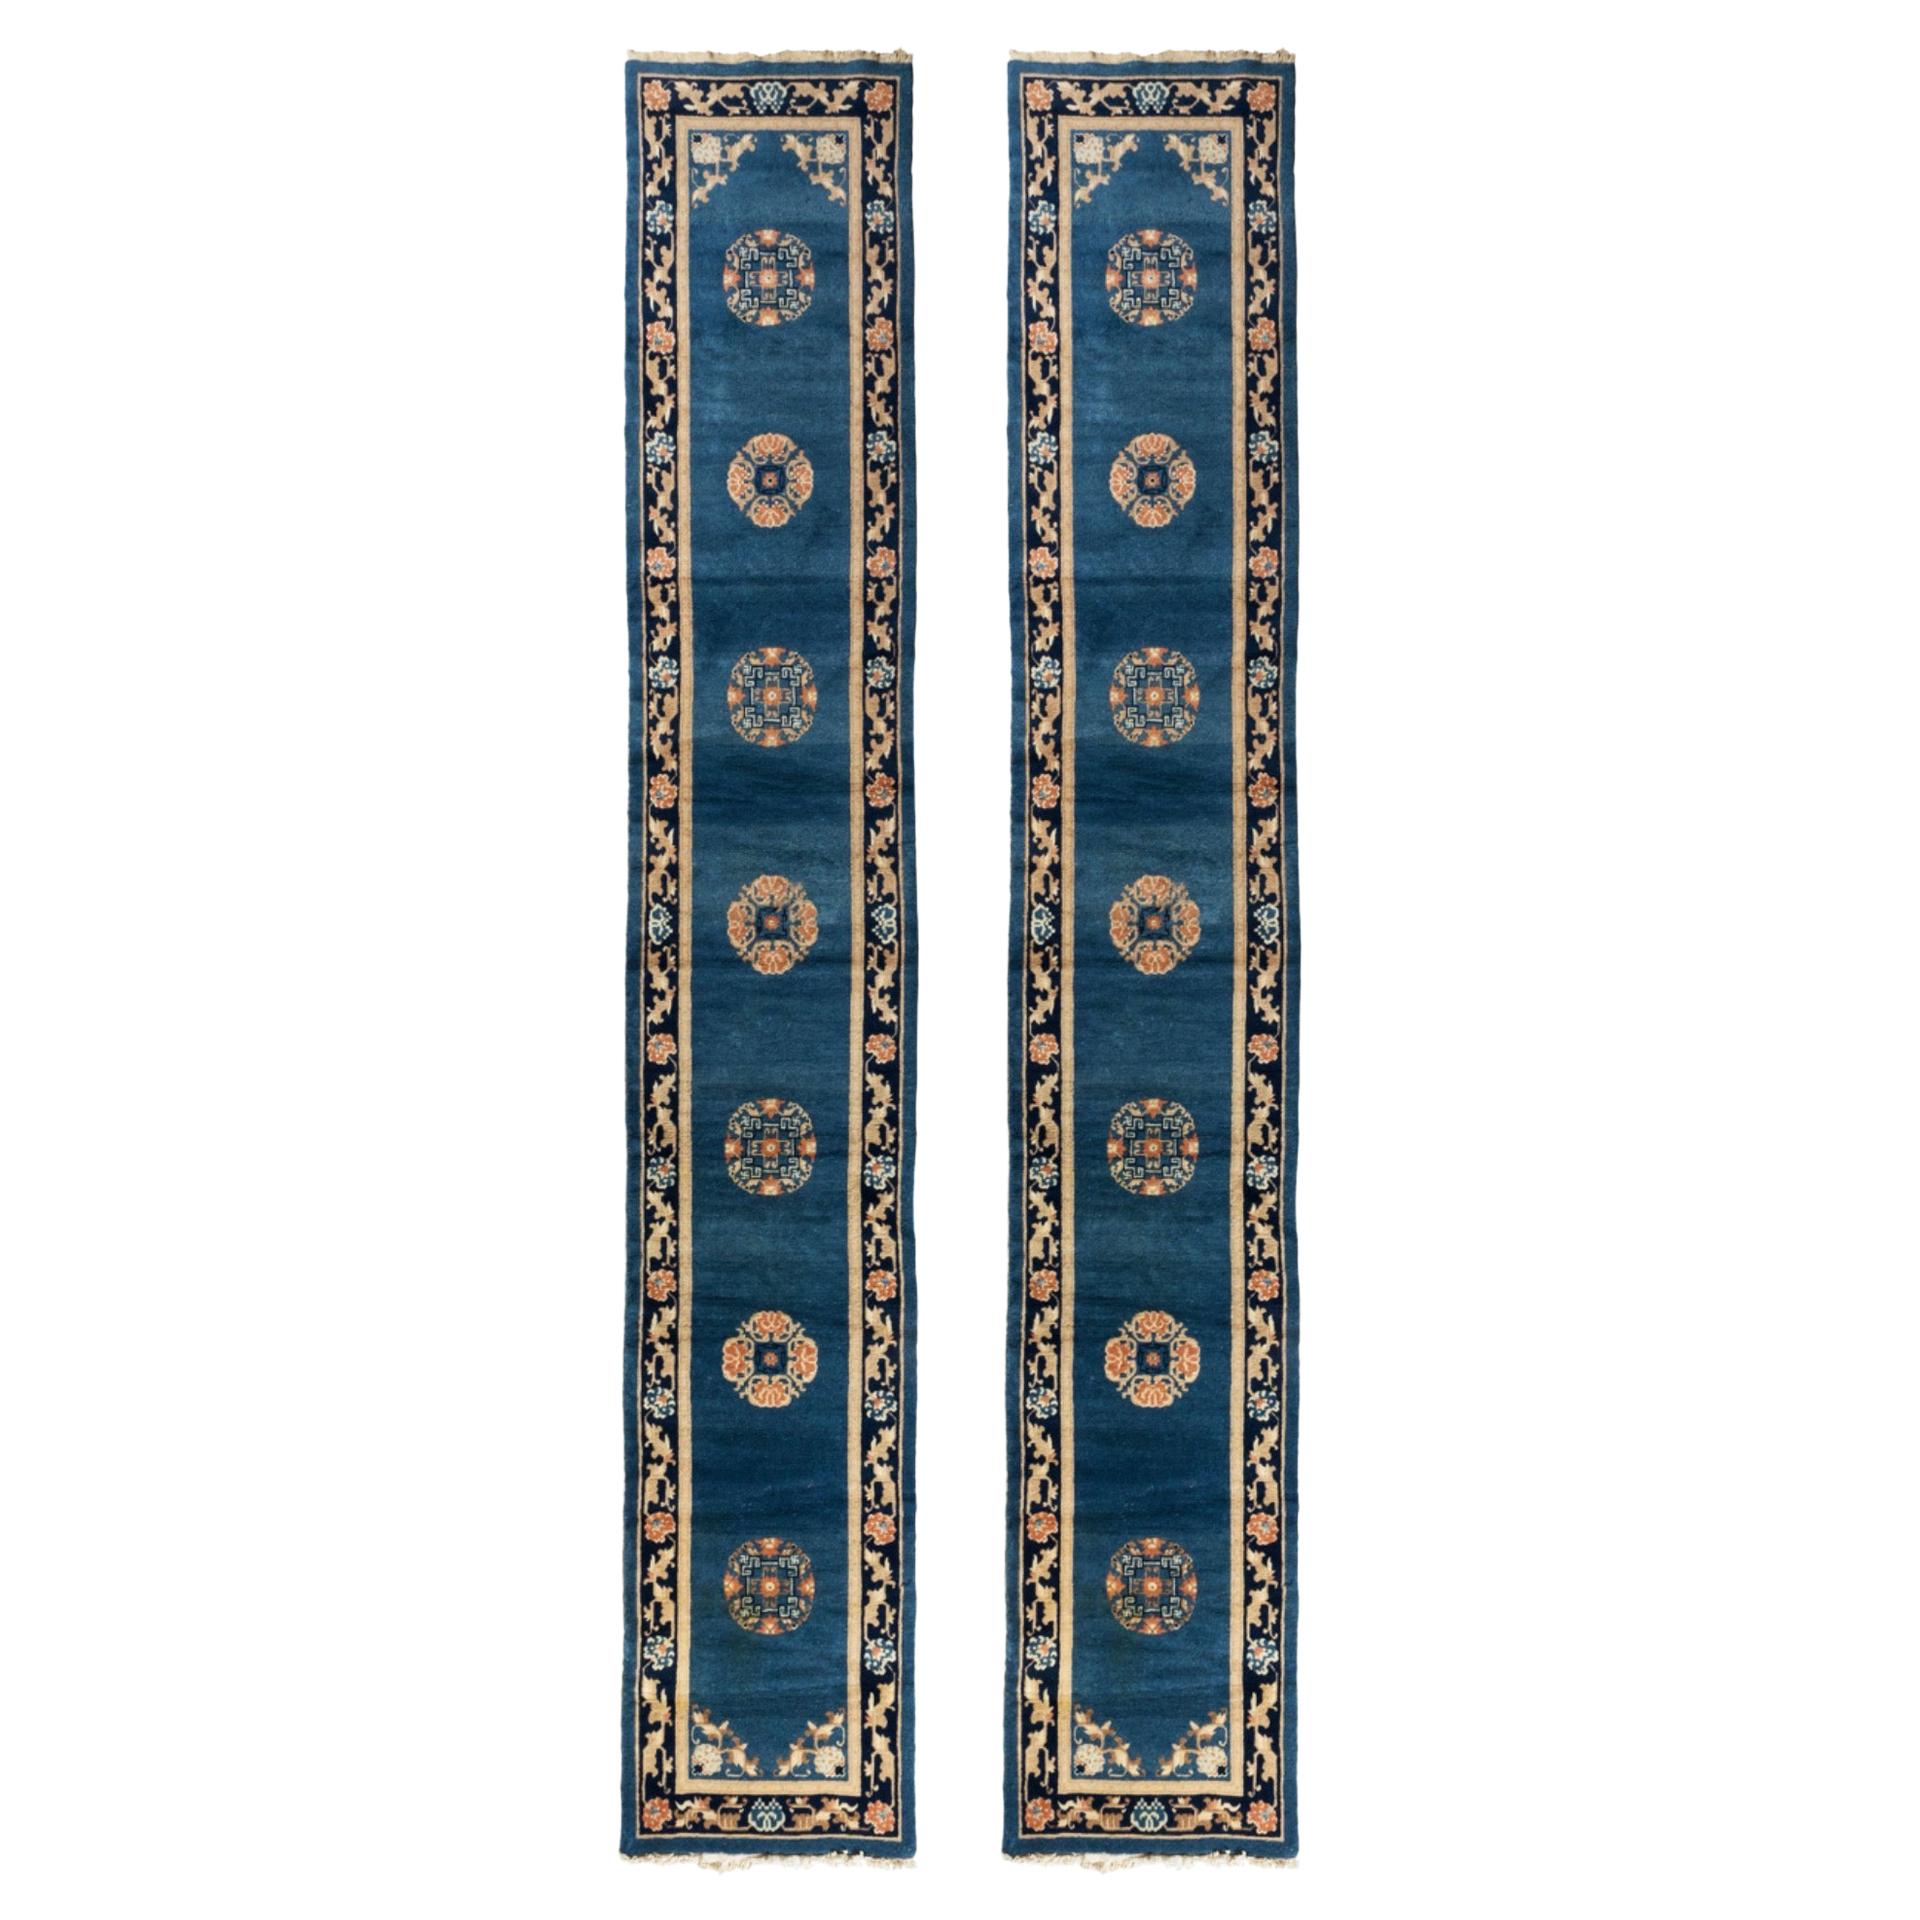 Pair of Antique Blue Gold Black Art Deco Chinese Runner Rugs, c. 1920-1930 For Sale